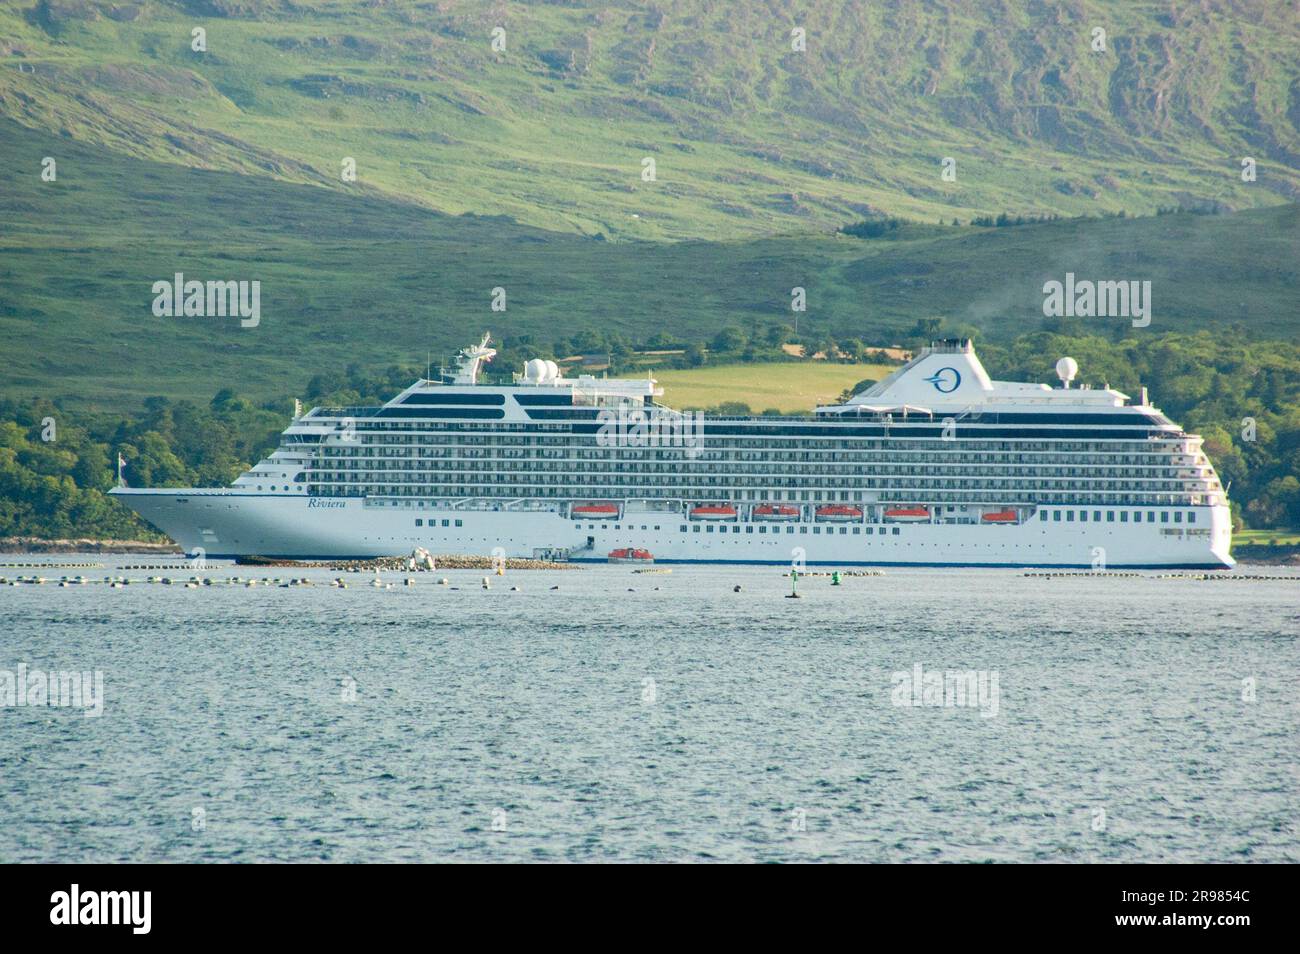 Sunday 25 Jun 2023 Bantry West Cork, Ireland; The cruise ship SH Riviera arrived into Bantry port today. The SH Riviera, a Marshall Islands registered vessel, carrying 1200 passengers set Her anchor at 8am and passengers disembarked for day trips to Killarney, the Beara peninsula and around Bantry town. Credit; ED/Alamy Live News Stock Photo